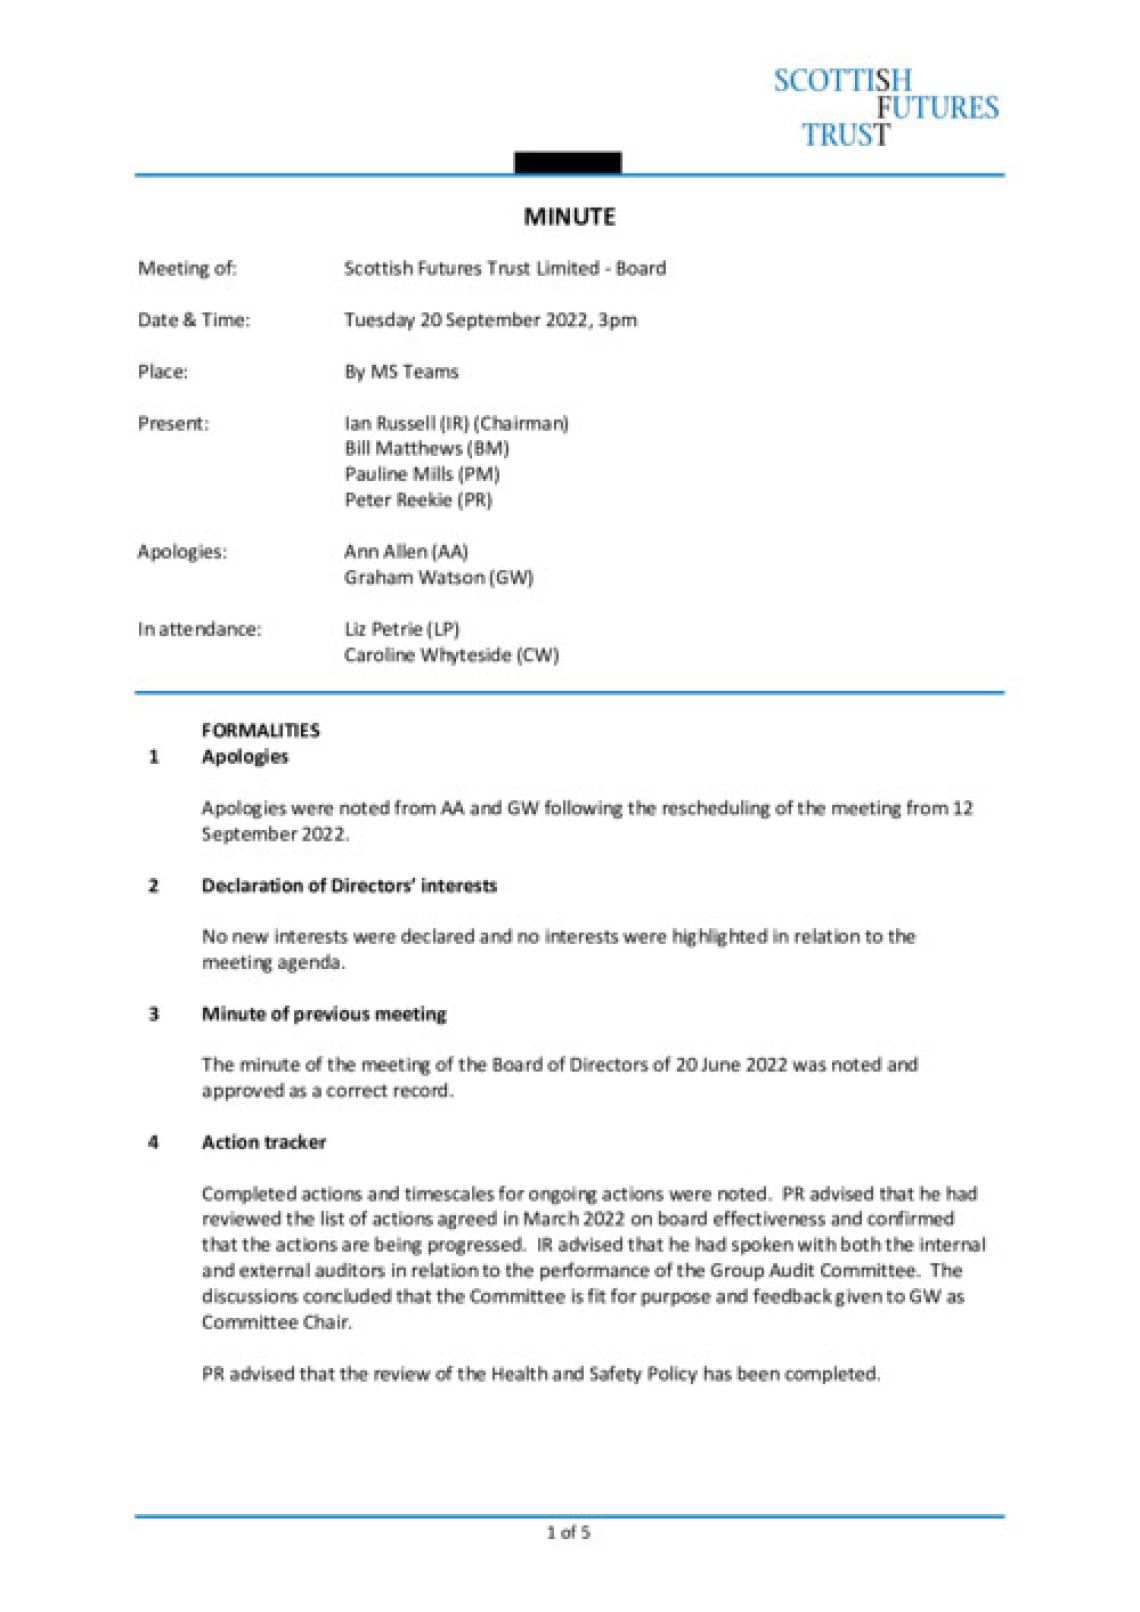 SFT Board minutes - September 2022 cover